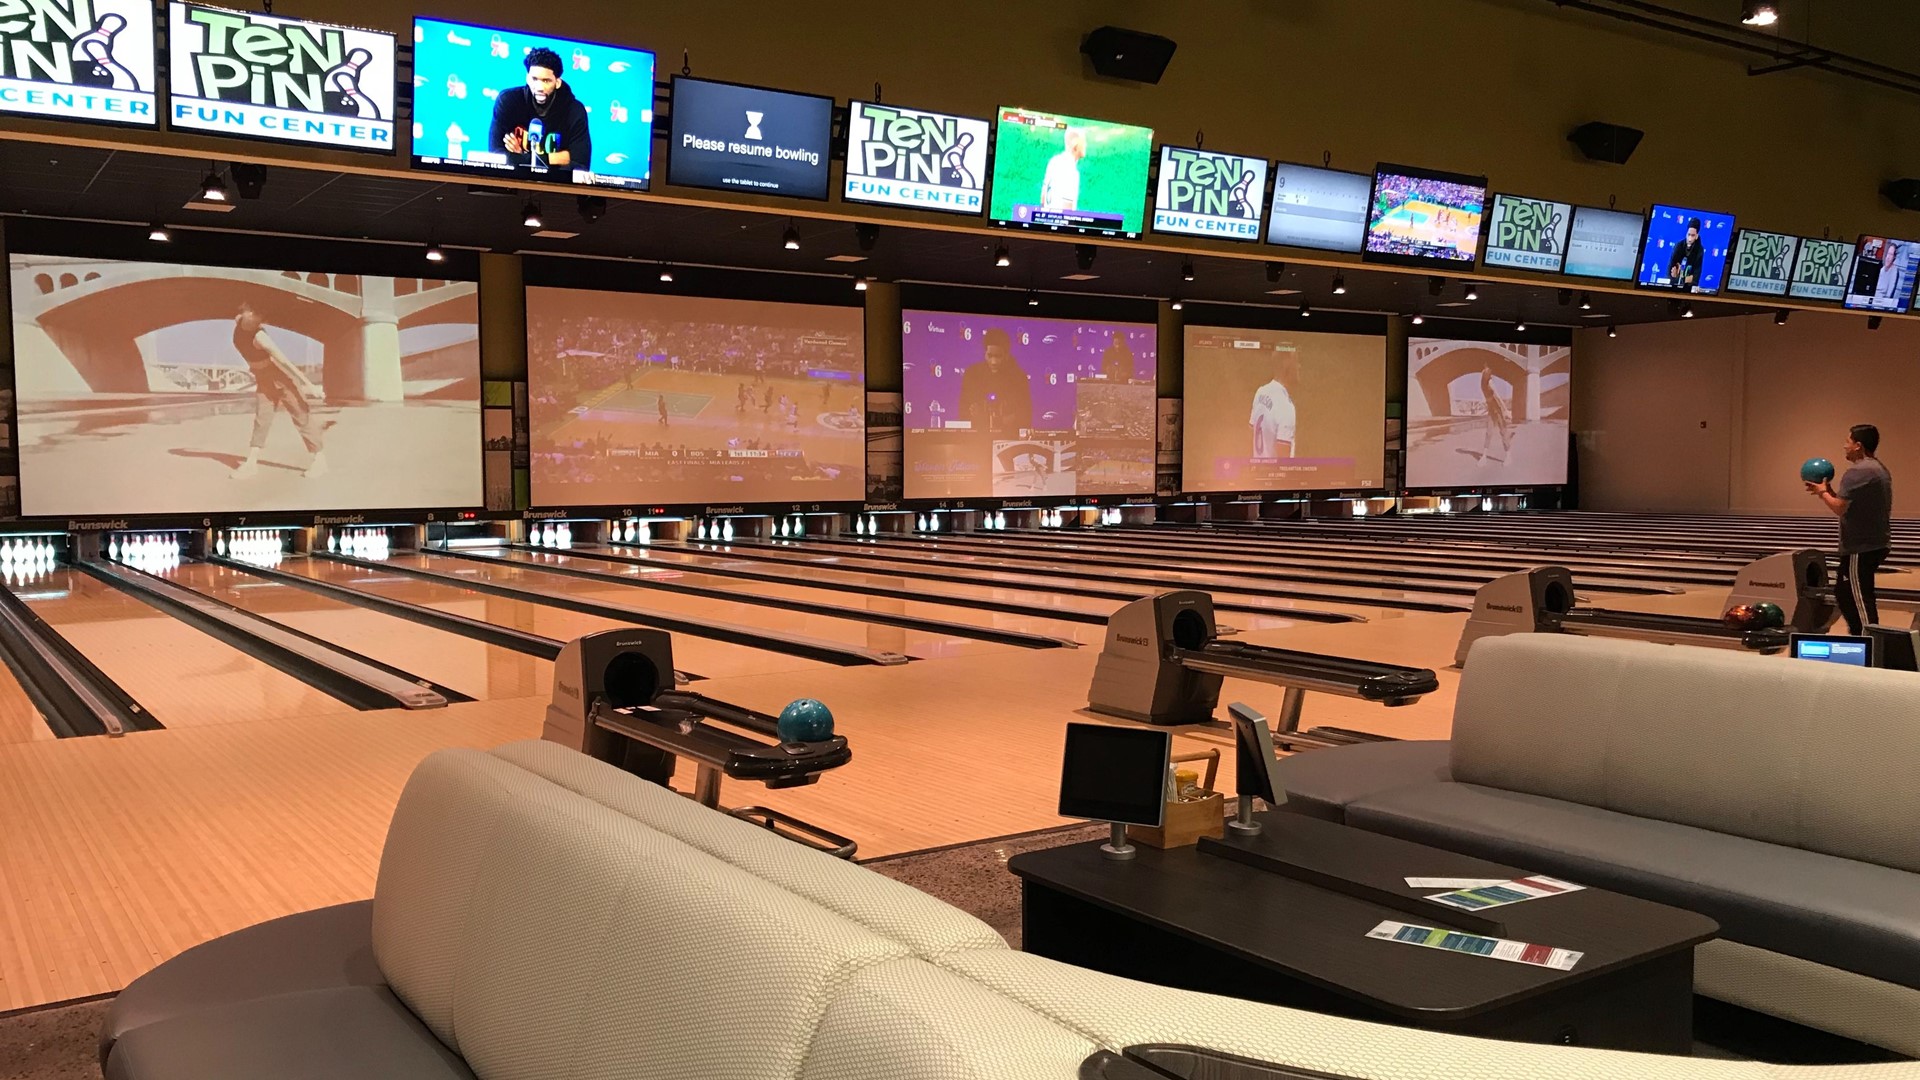 10 Pin Fun Center is the first bowling alley in Turlock in more than 20 years. Its journey to opening day has kept the city eagerly waiting for more than a decade.